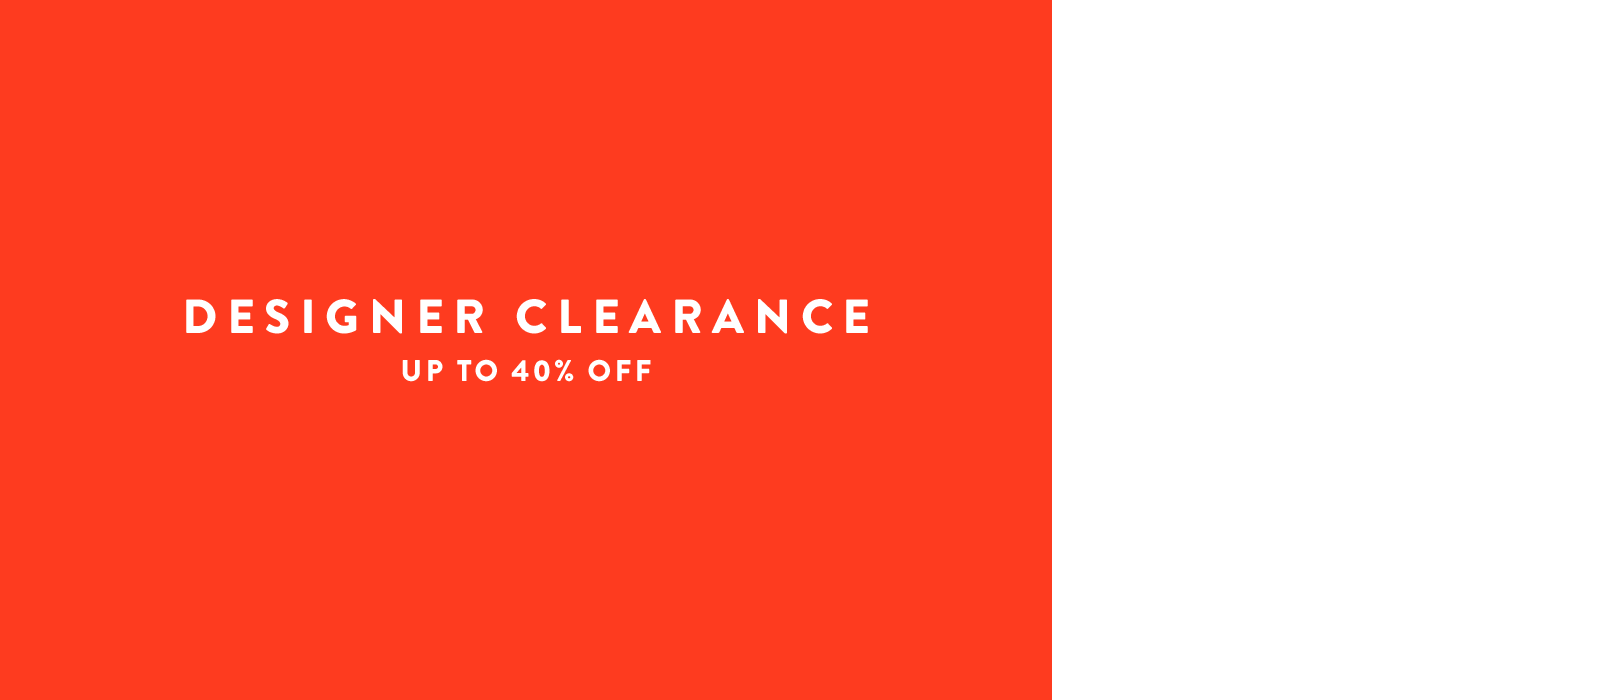 Designer clearance: up to 40% off.